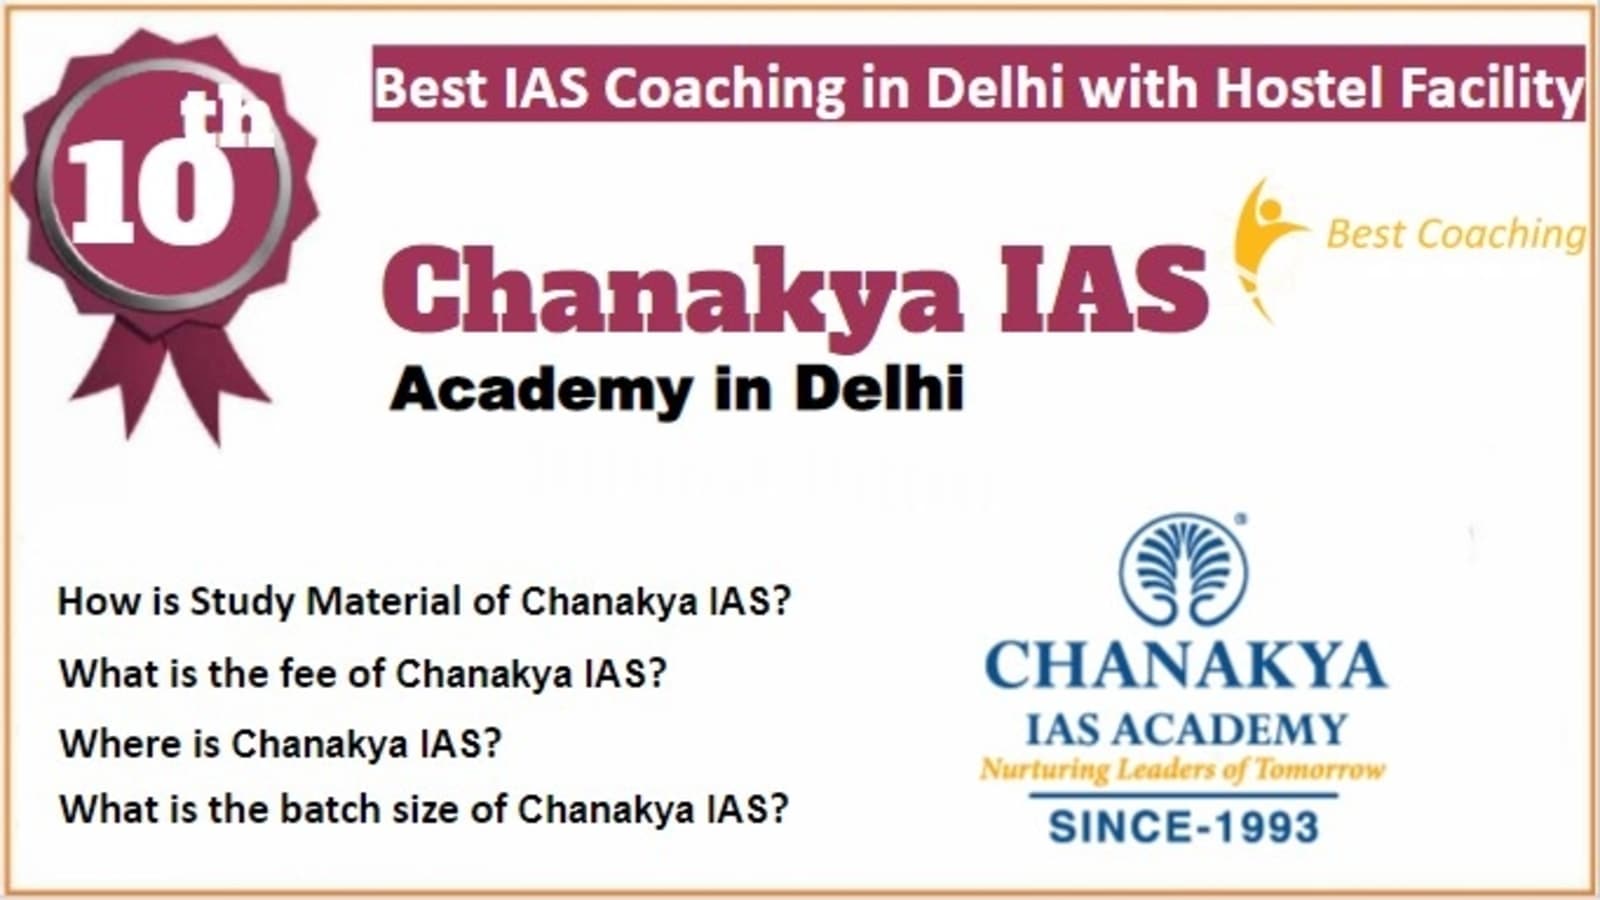 Rank 10 Best IAS Coaching in Delhi with Hostel Facility